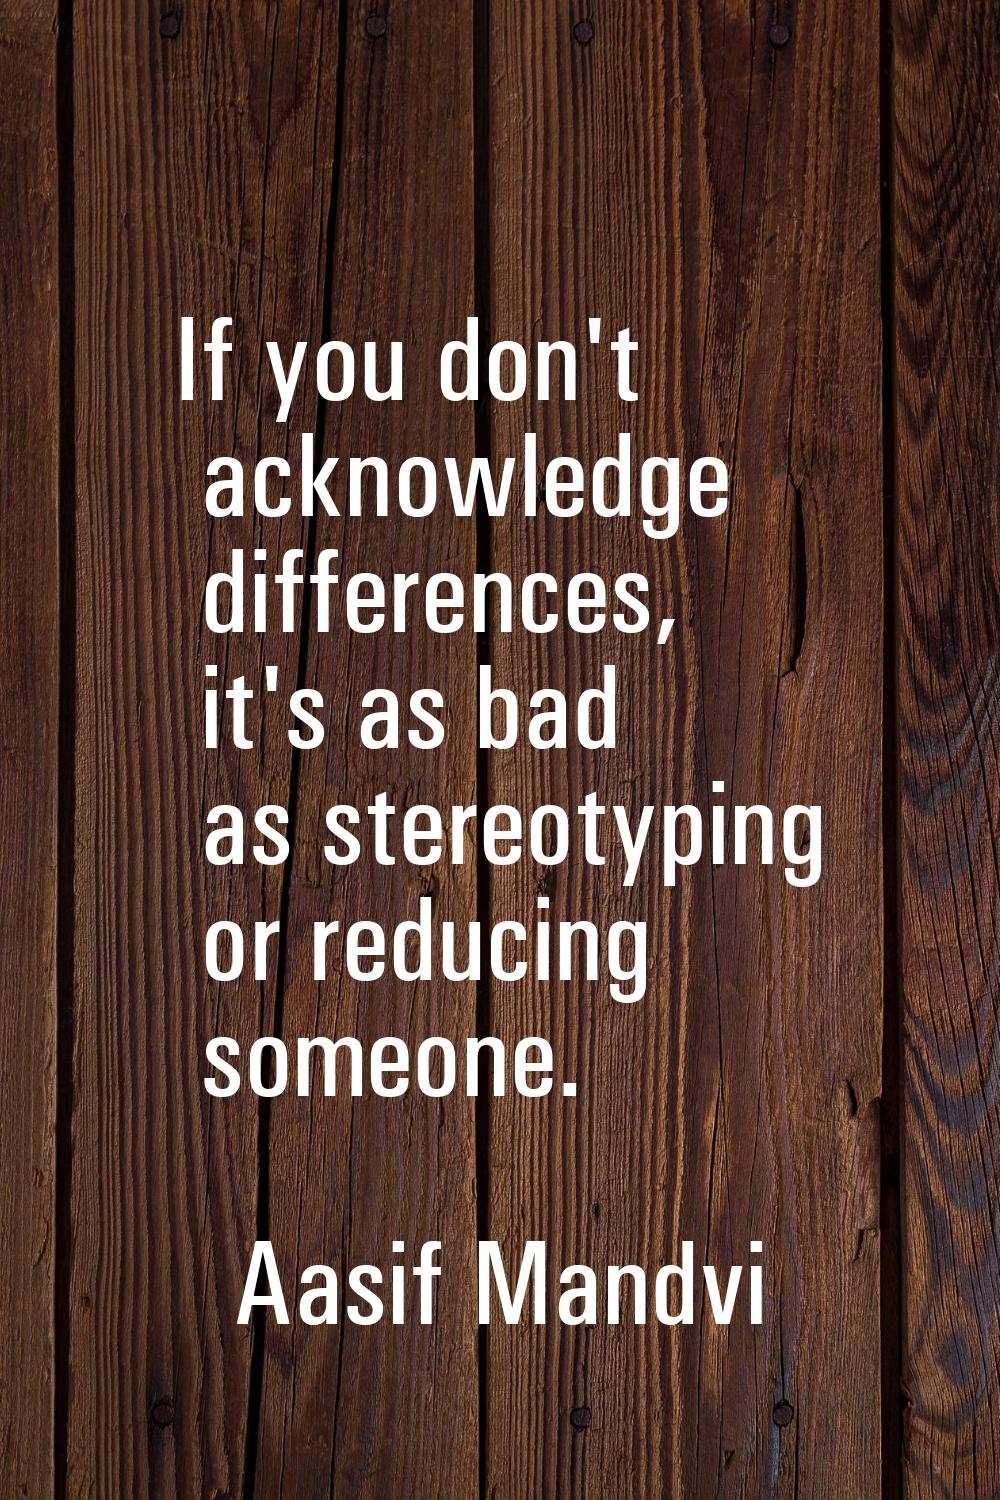 If you don't acknowledge differences, it's as bad as stereotyping or reducing someone.